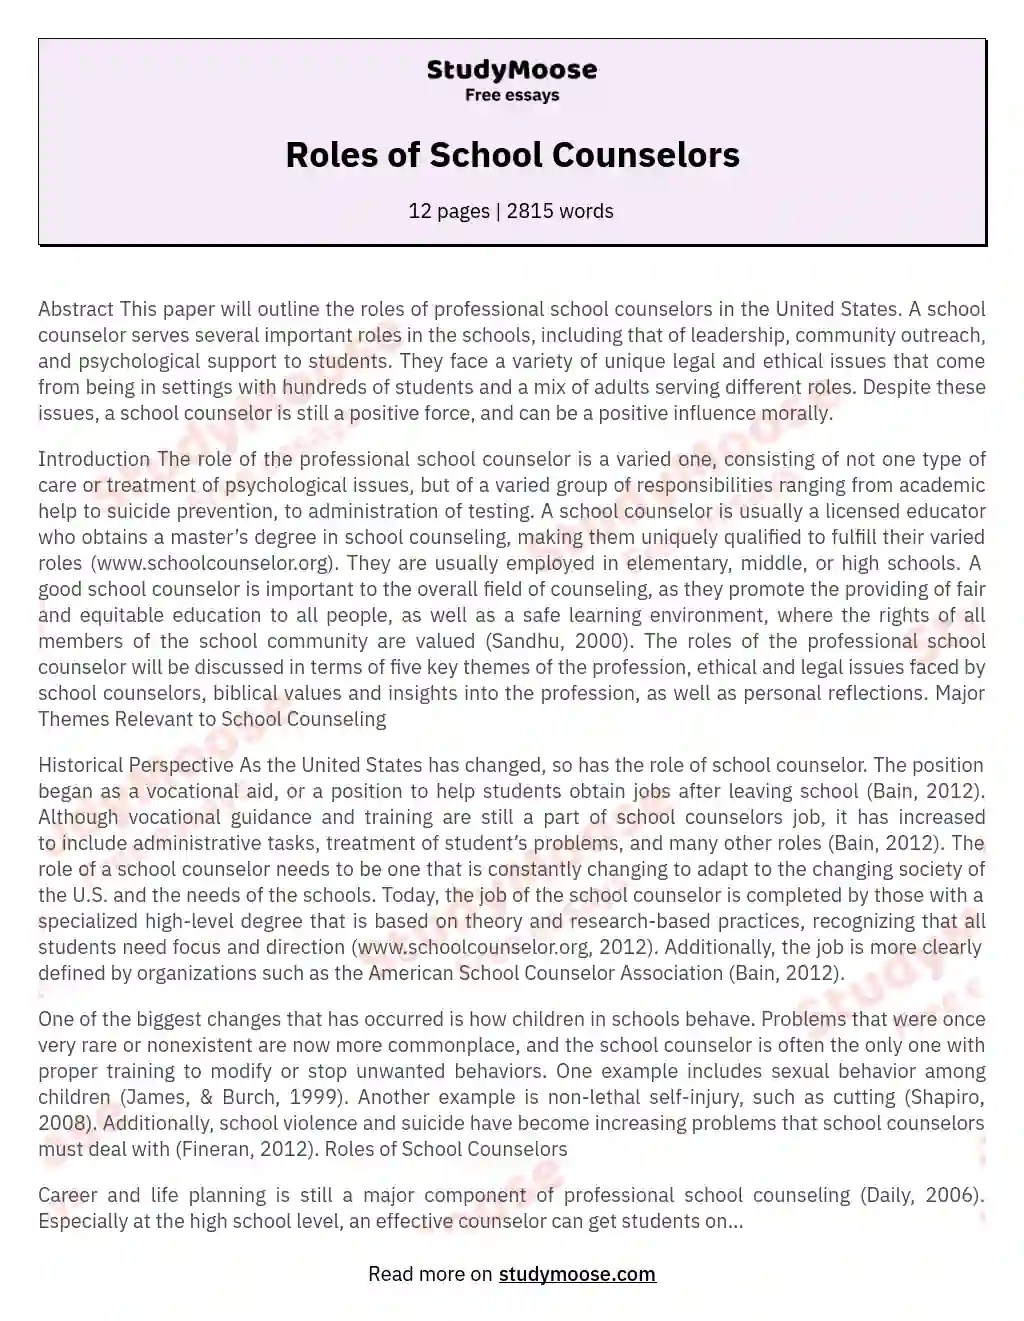 Roles of School Counselors essay